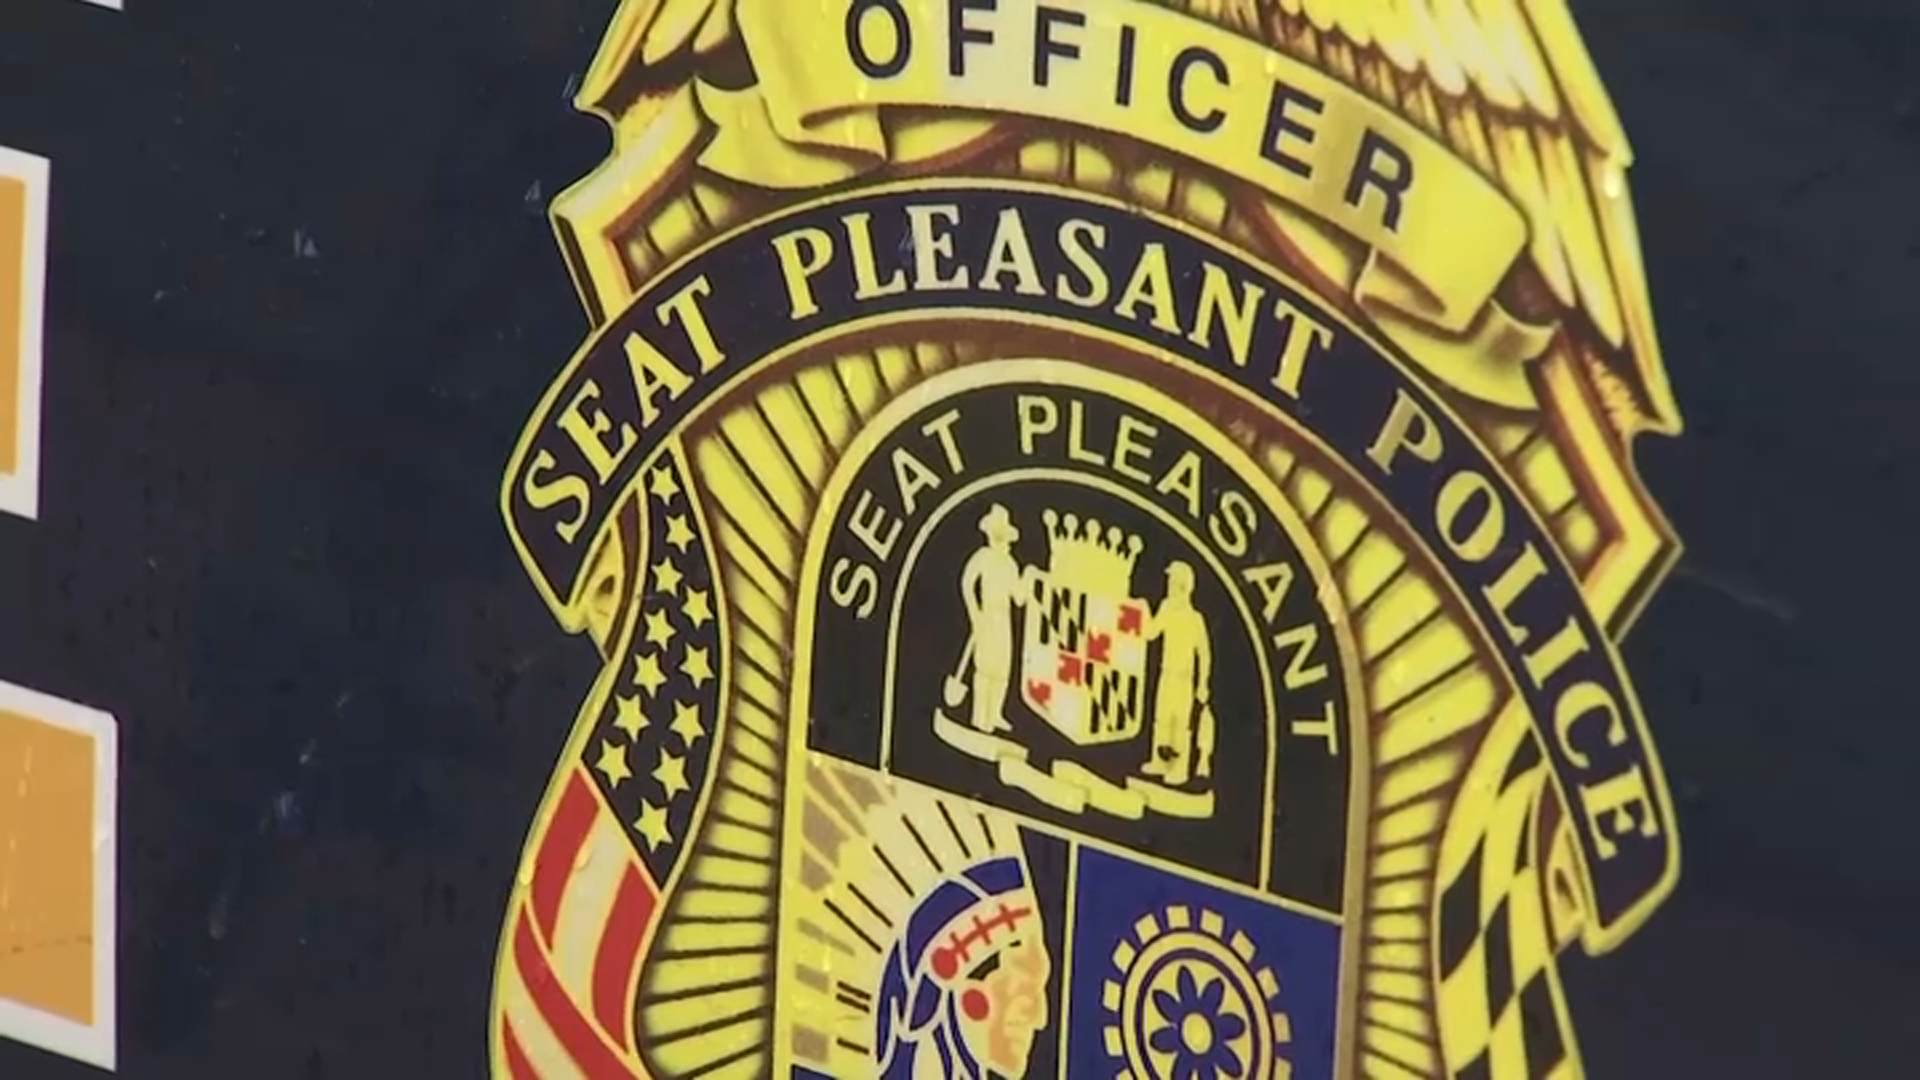 3 Seat Pleasant Officers Suspended